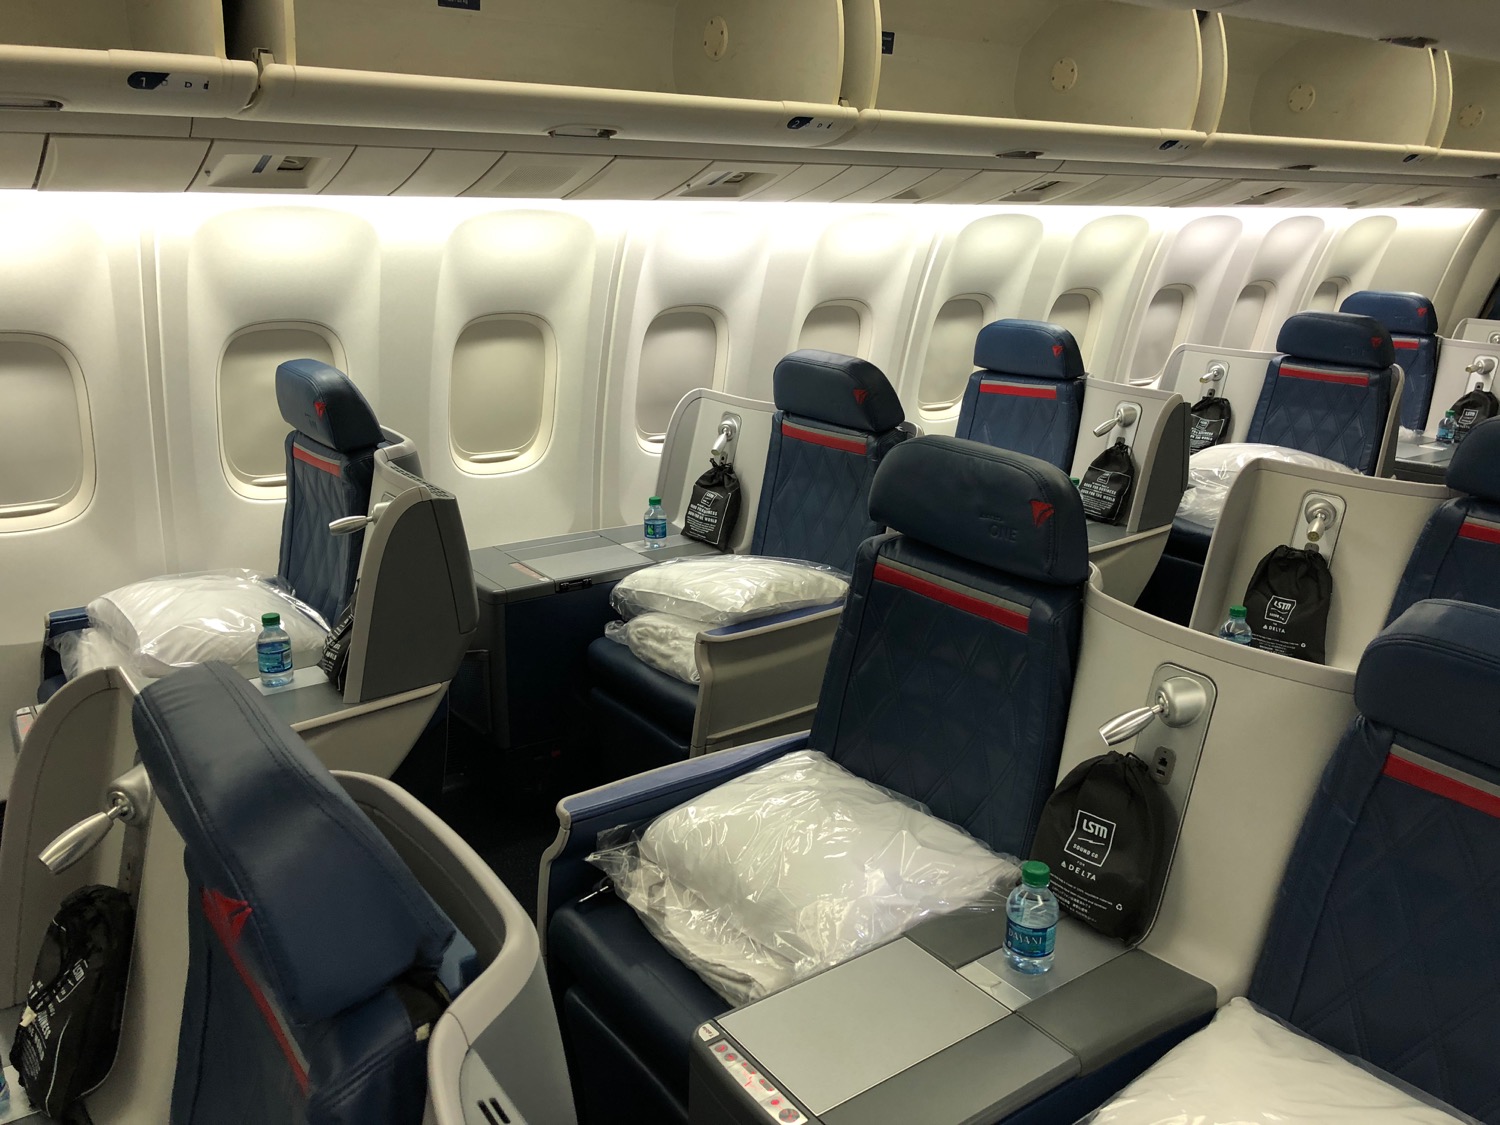 I Enjoyed My Flight on Delta, But... - Live and Let's Fly